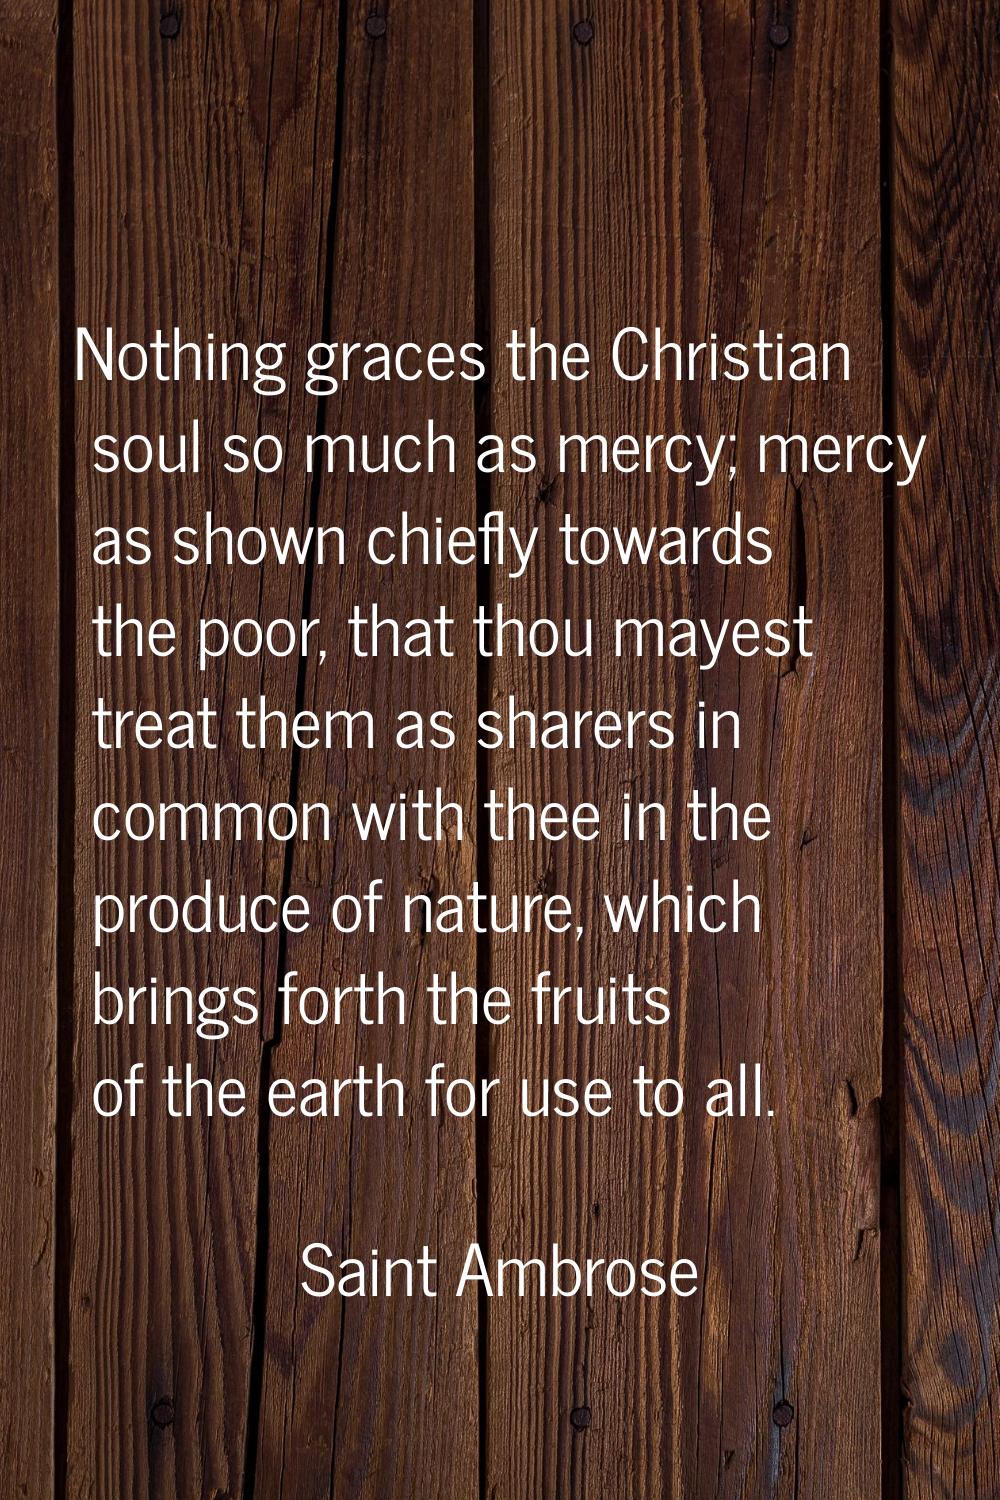 Nothing graces the Christian soul so much as mercy; mercy as shown chiefly towards the poor, that t